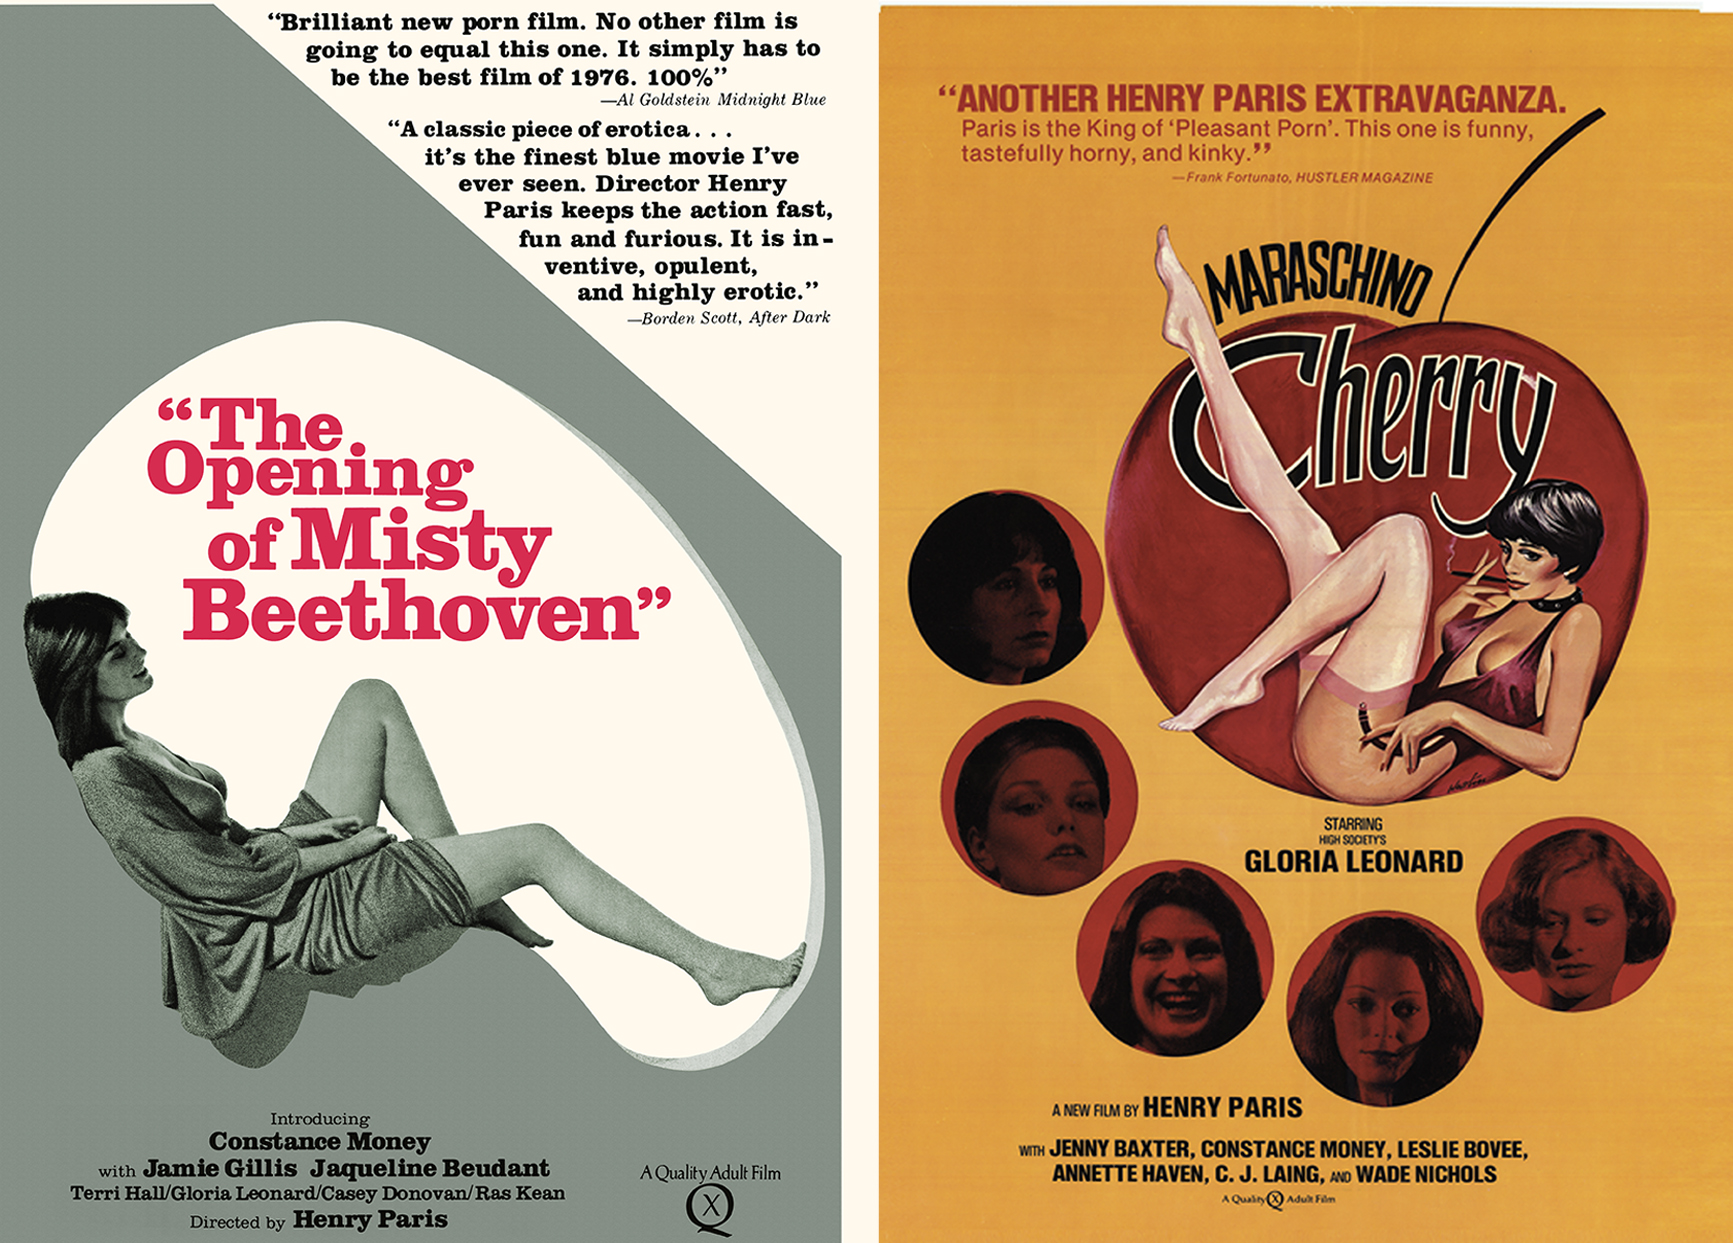 The Opening of Misty Beethoven and Maraschino Cherry